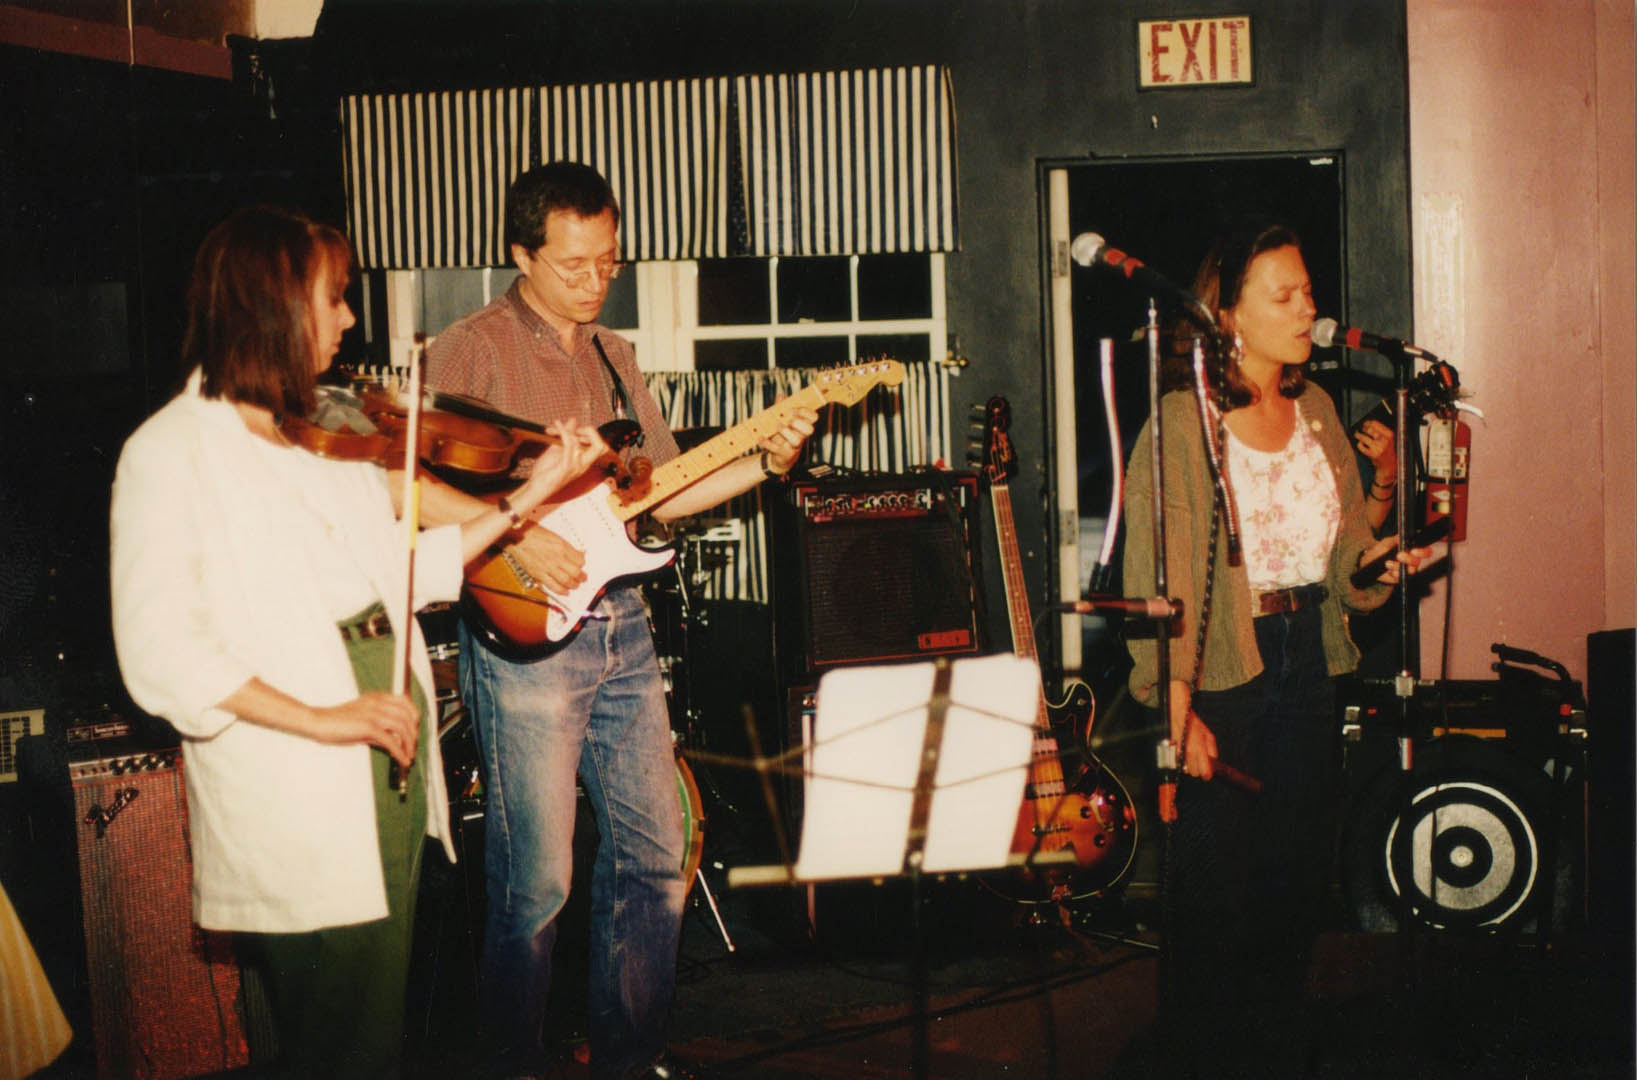 Melinda McCardell, Doug Hubley and Marcia Goldenberg during a Cowlix date at Norton\'s, opening for the Moxie Men, in 1992. Photo by Jeff Stanton.